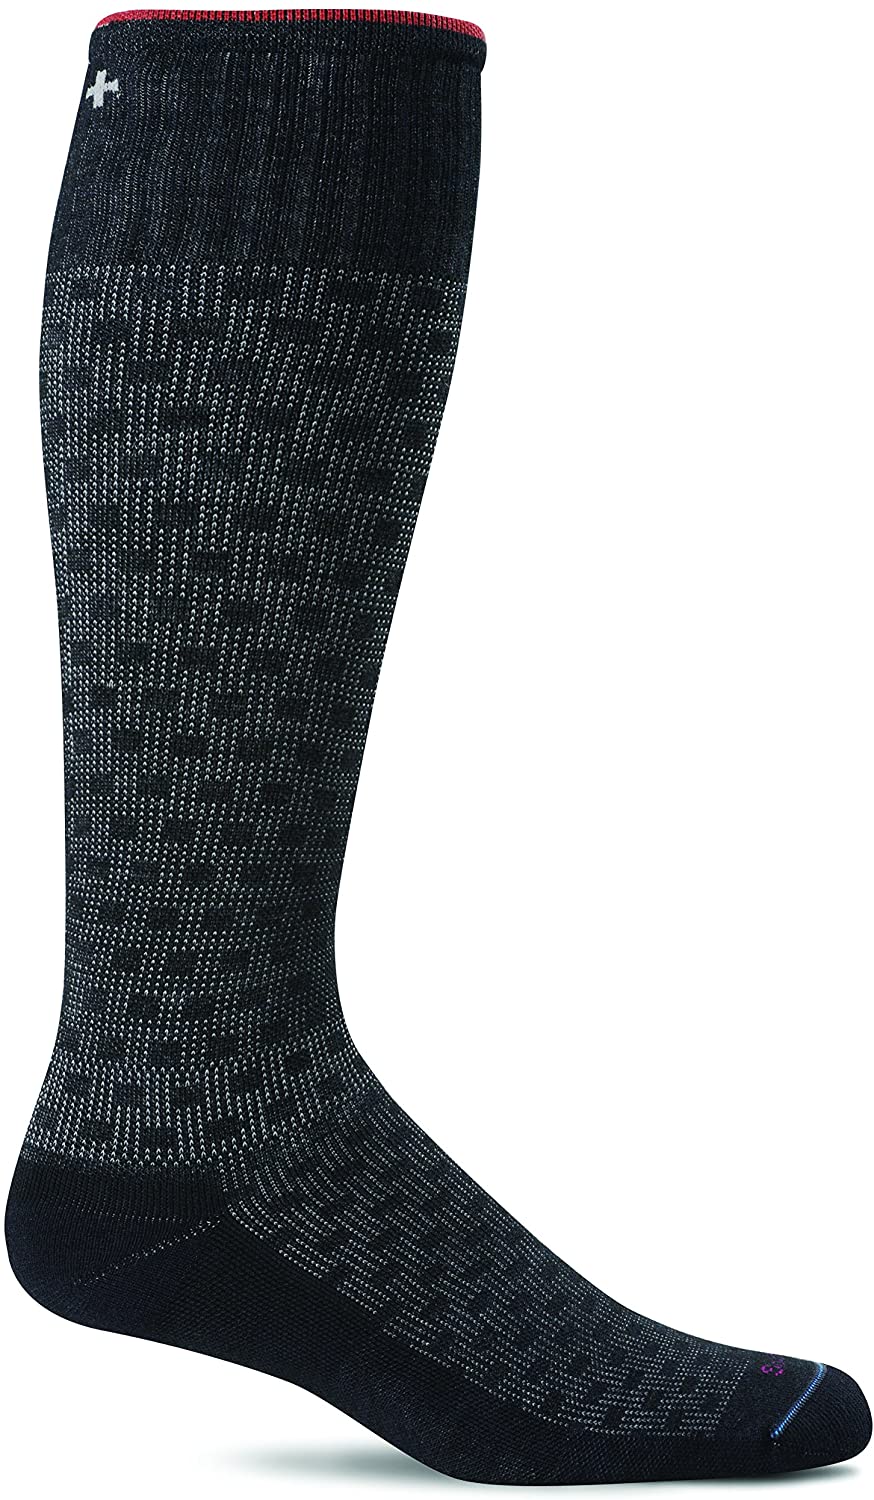 Sockwell Men's Shadow Box Moderate Graduated Compression Sock in Black from the side